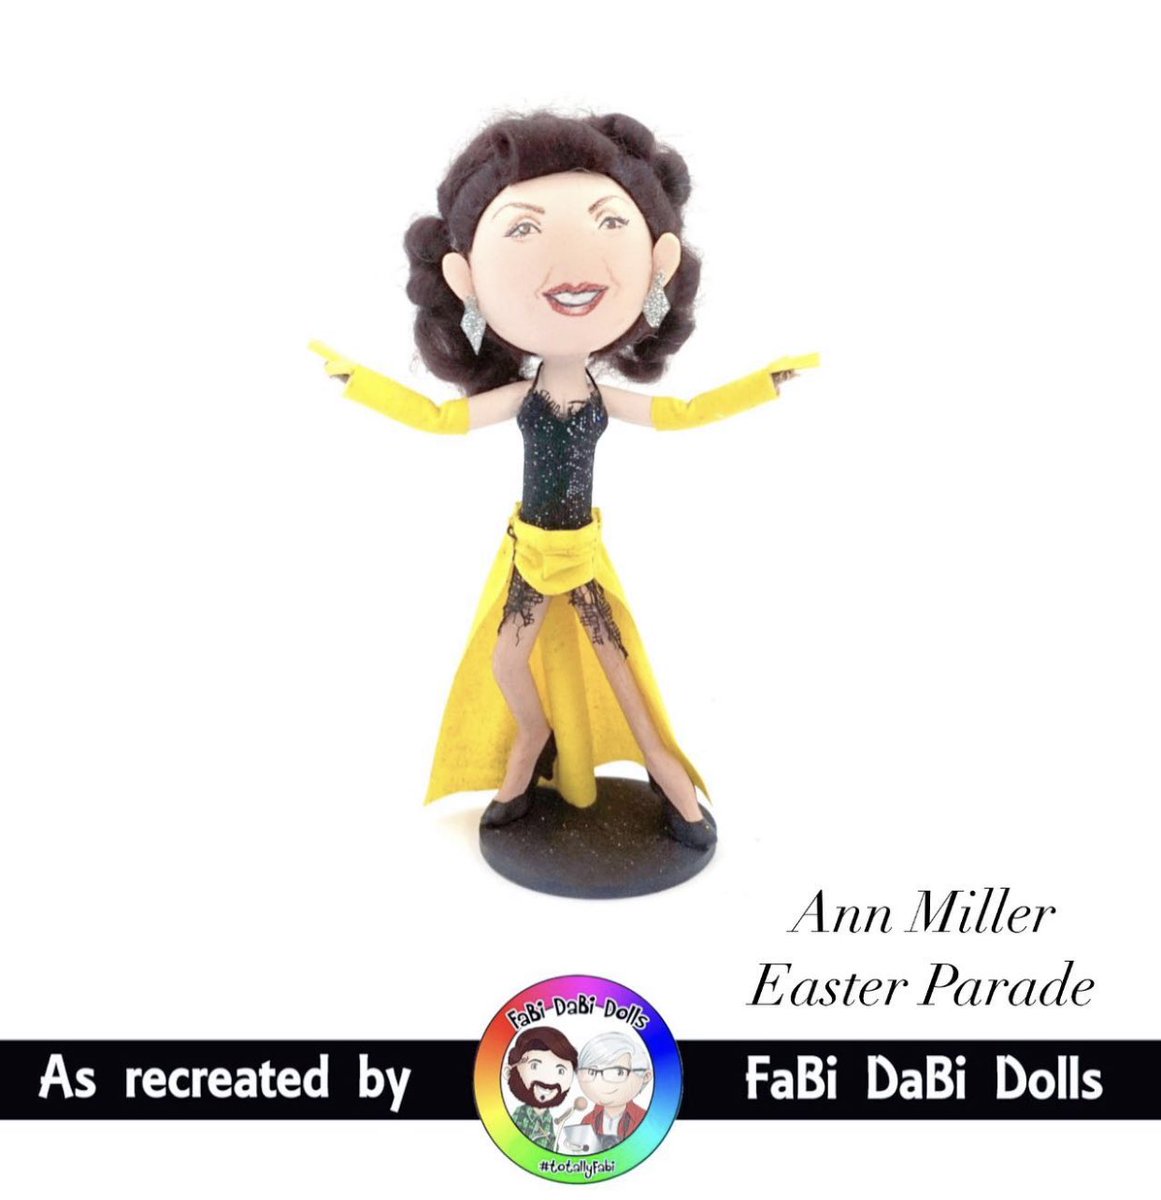 If in doubt - do like Ann Miller and Shake those blues away to have a truly FaB Easter !! 

#annmiller #Easterparade #fabidabidolls